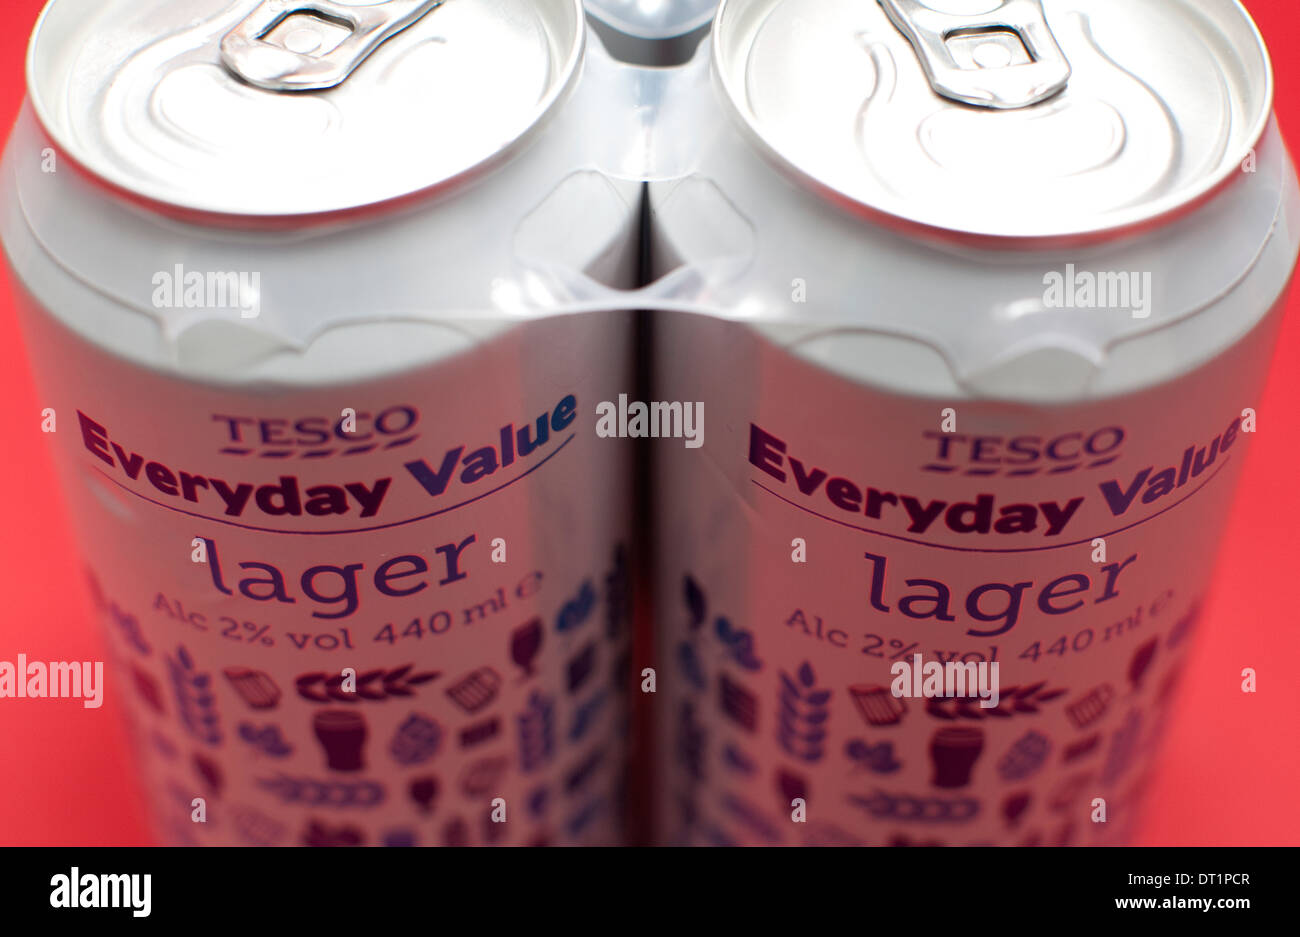 Cans of Tesco Everyday Value Lager, London Stock Photo